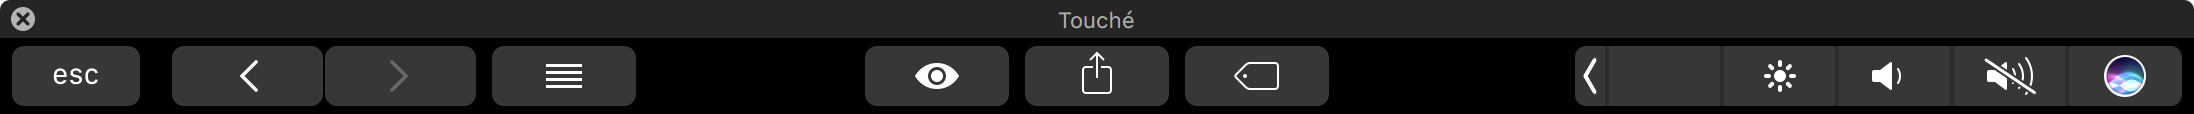 Full-size image of TouchÃ© Touch Bar